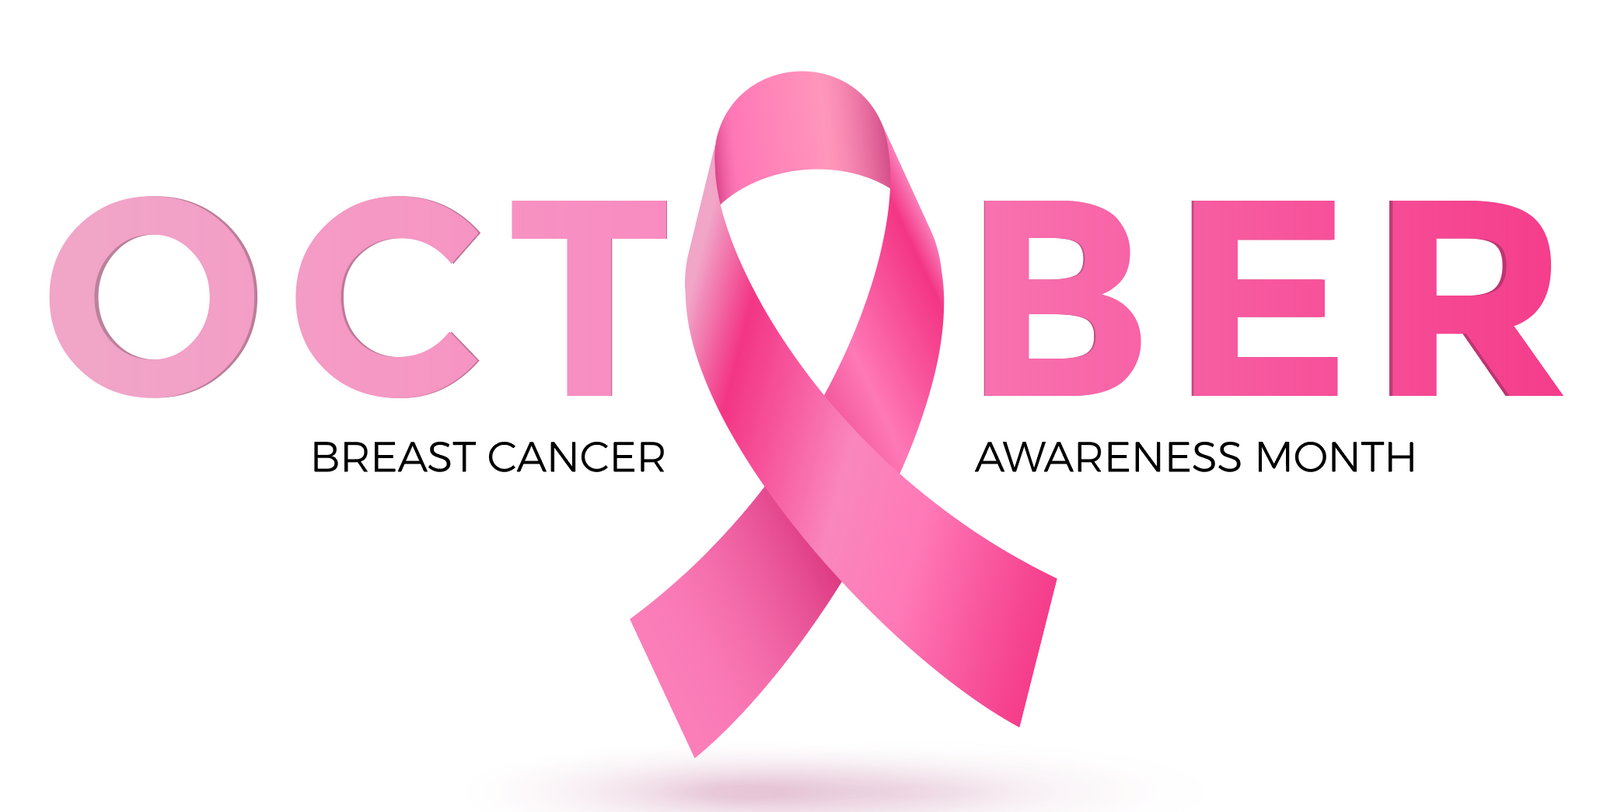 Breast Cancer Awareness Month: The Little Things Make a Big Difference